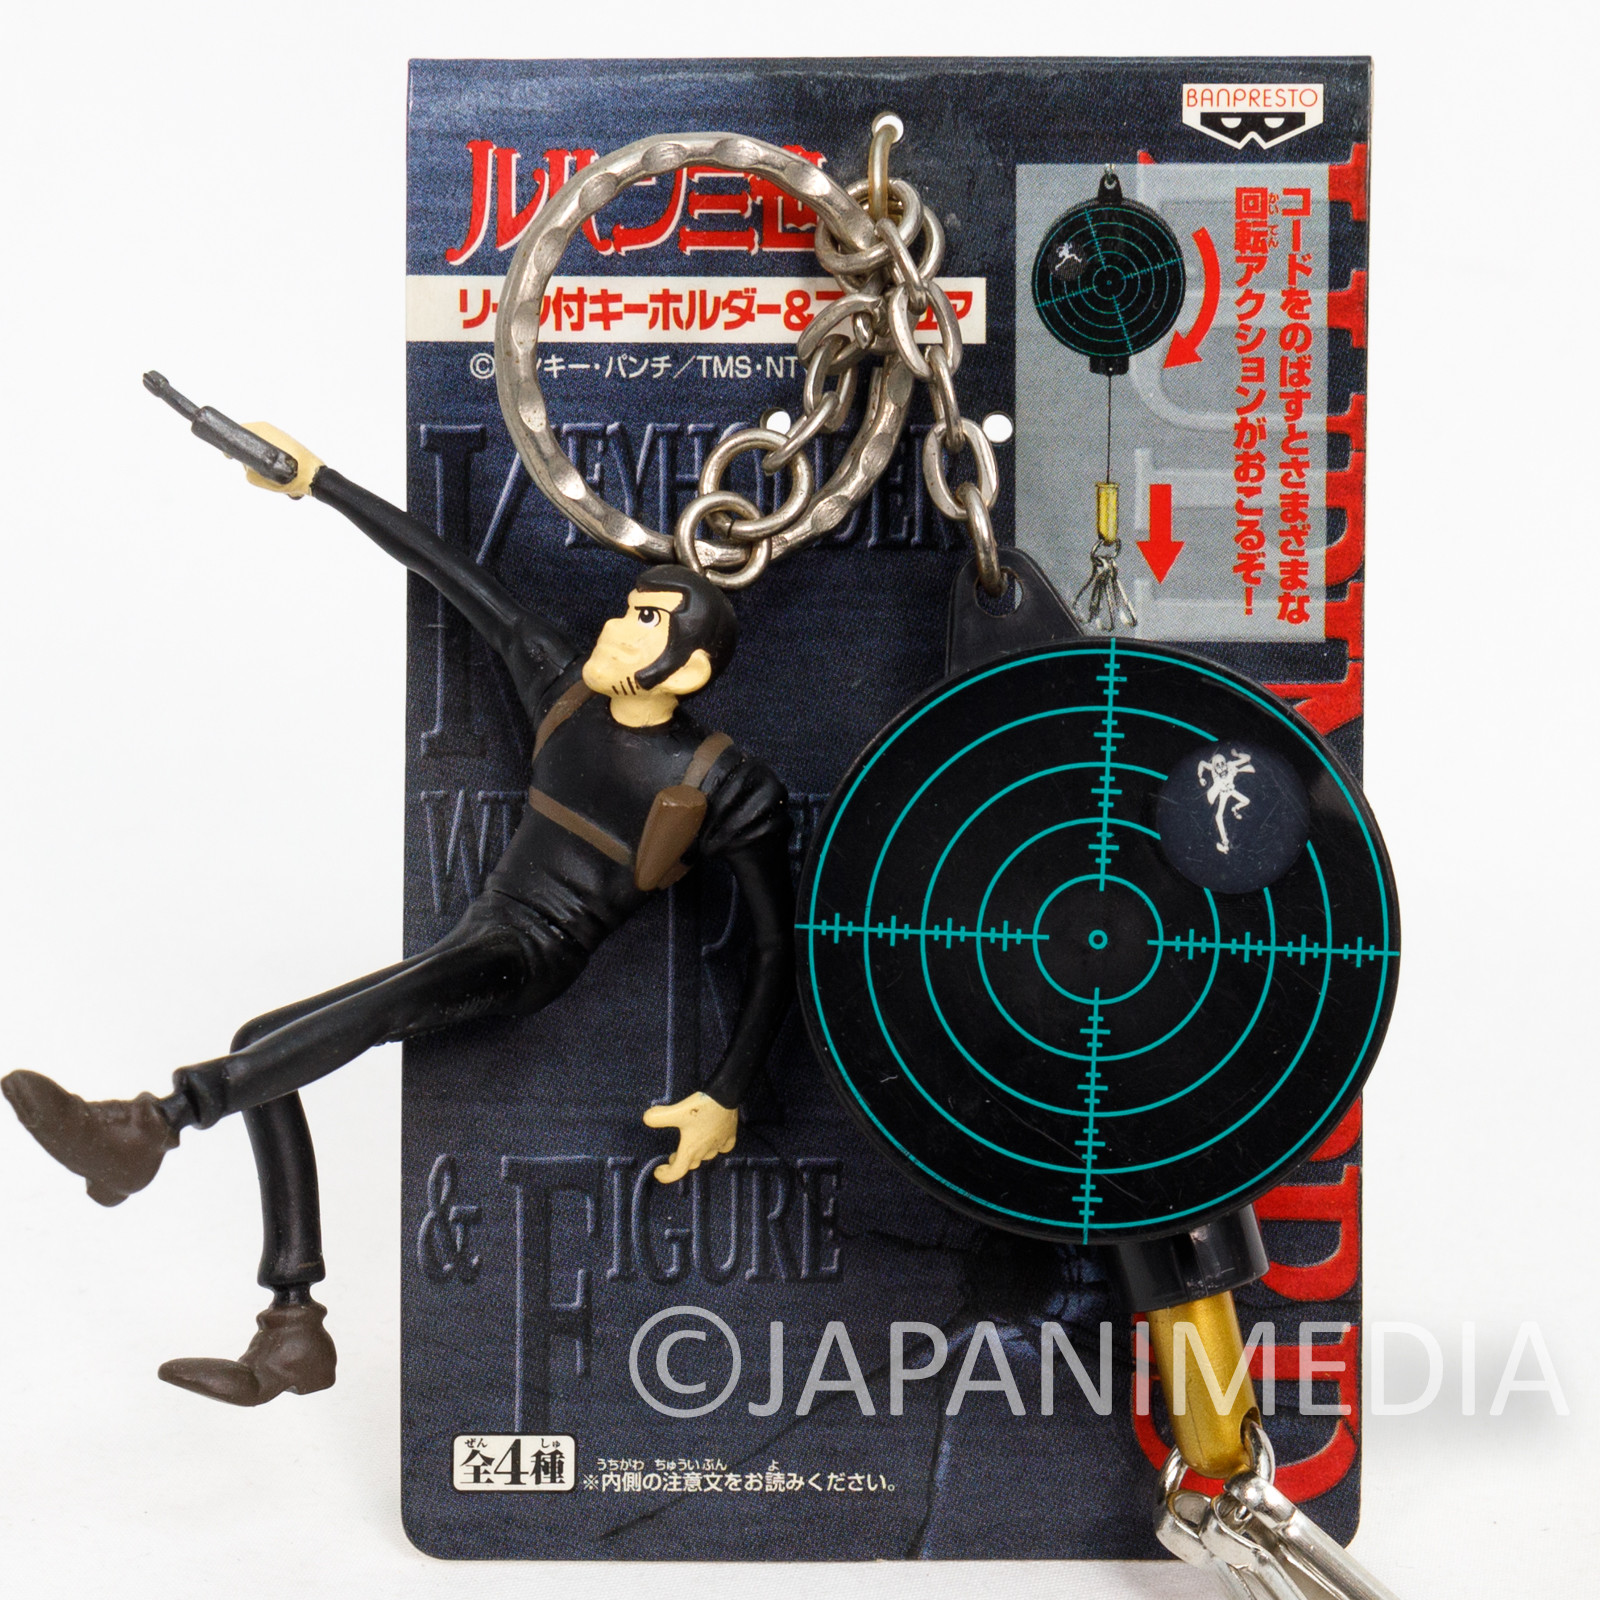 Lupin the Third (3rd) LUPIN Figure Keychain wit Reel JAPAN ANIME